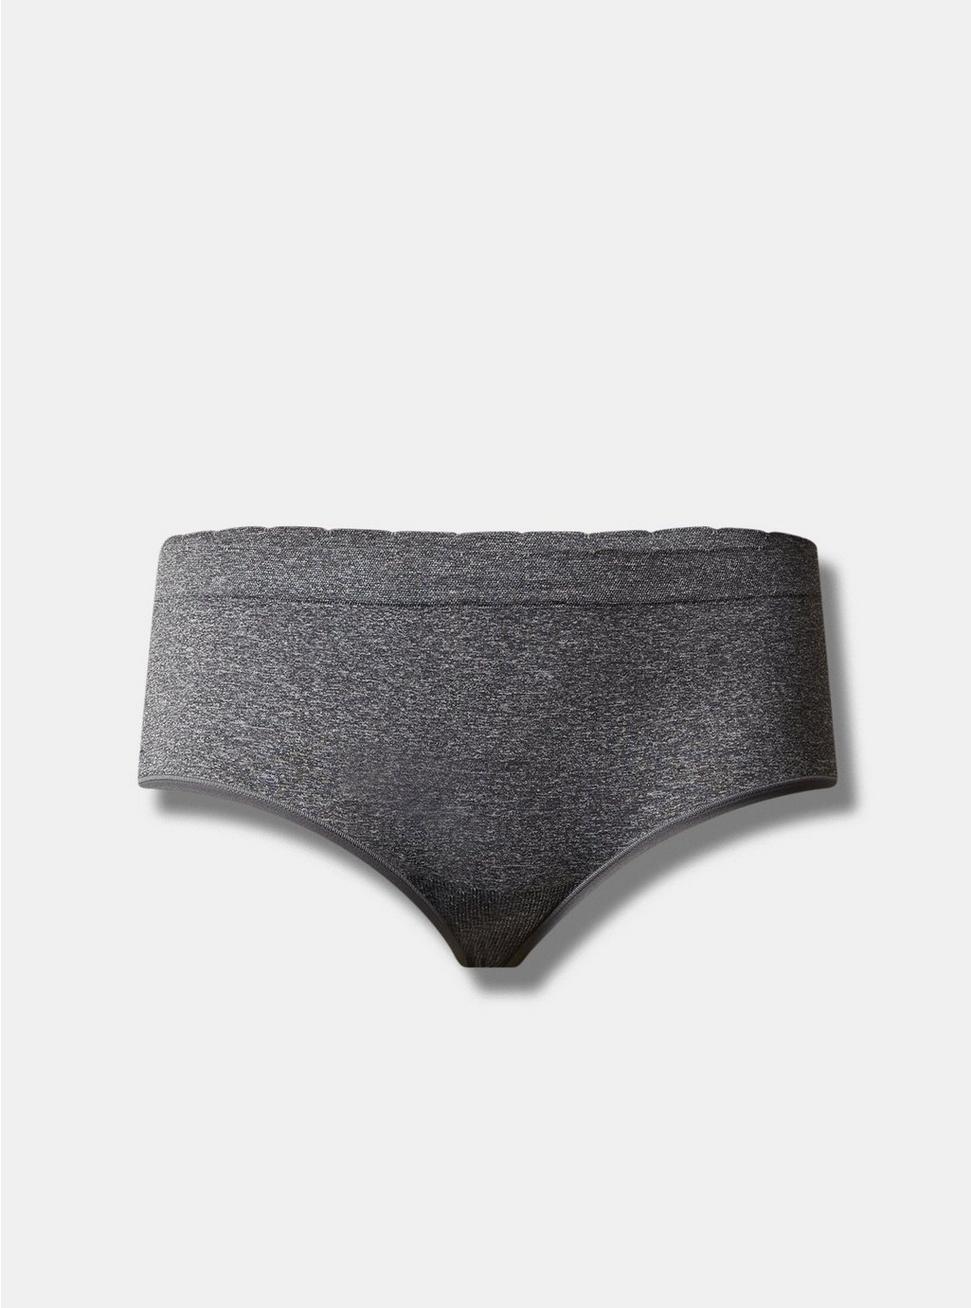 Seamless Smooth Mid-Rise Hipster Heather Panty, HEATHER GREY, alternate